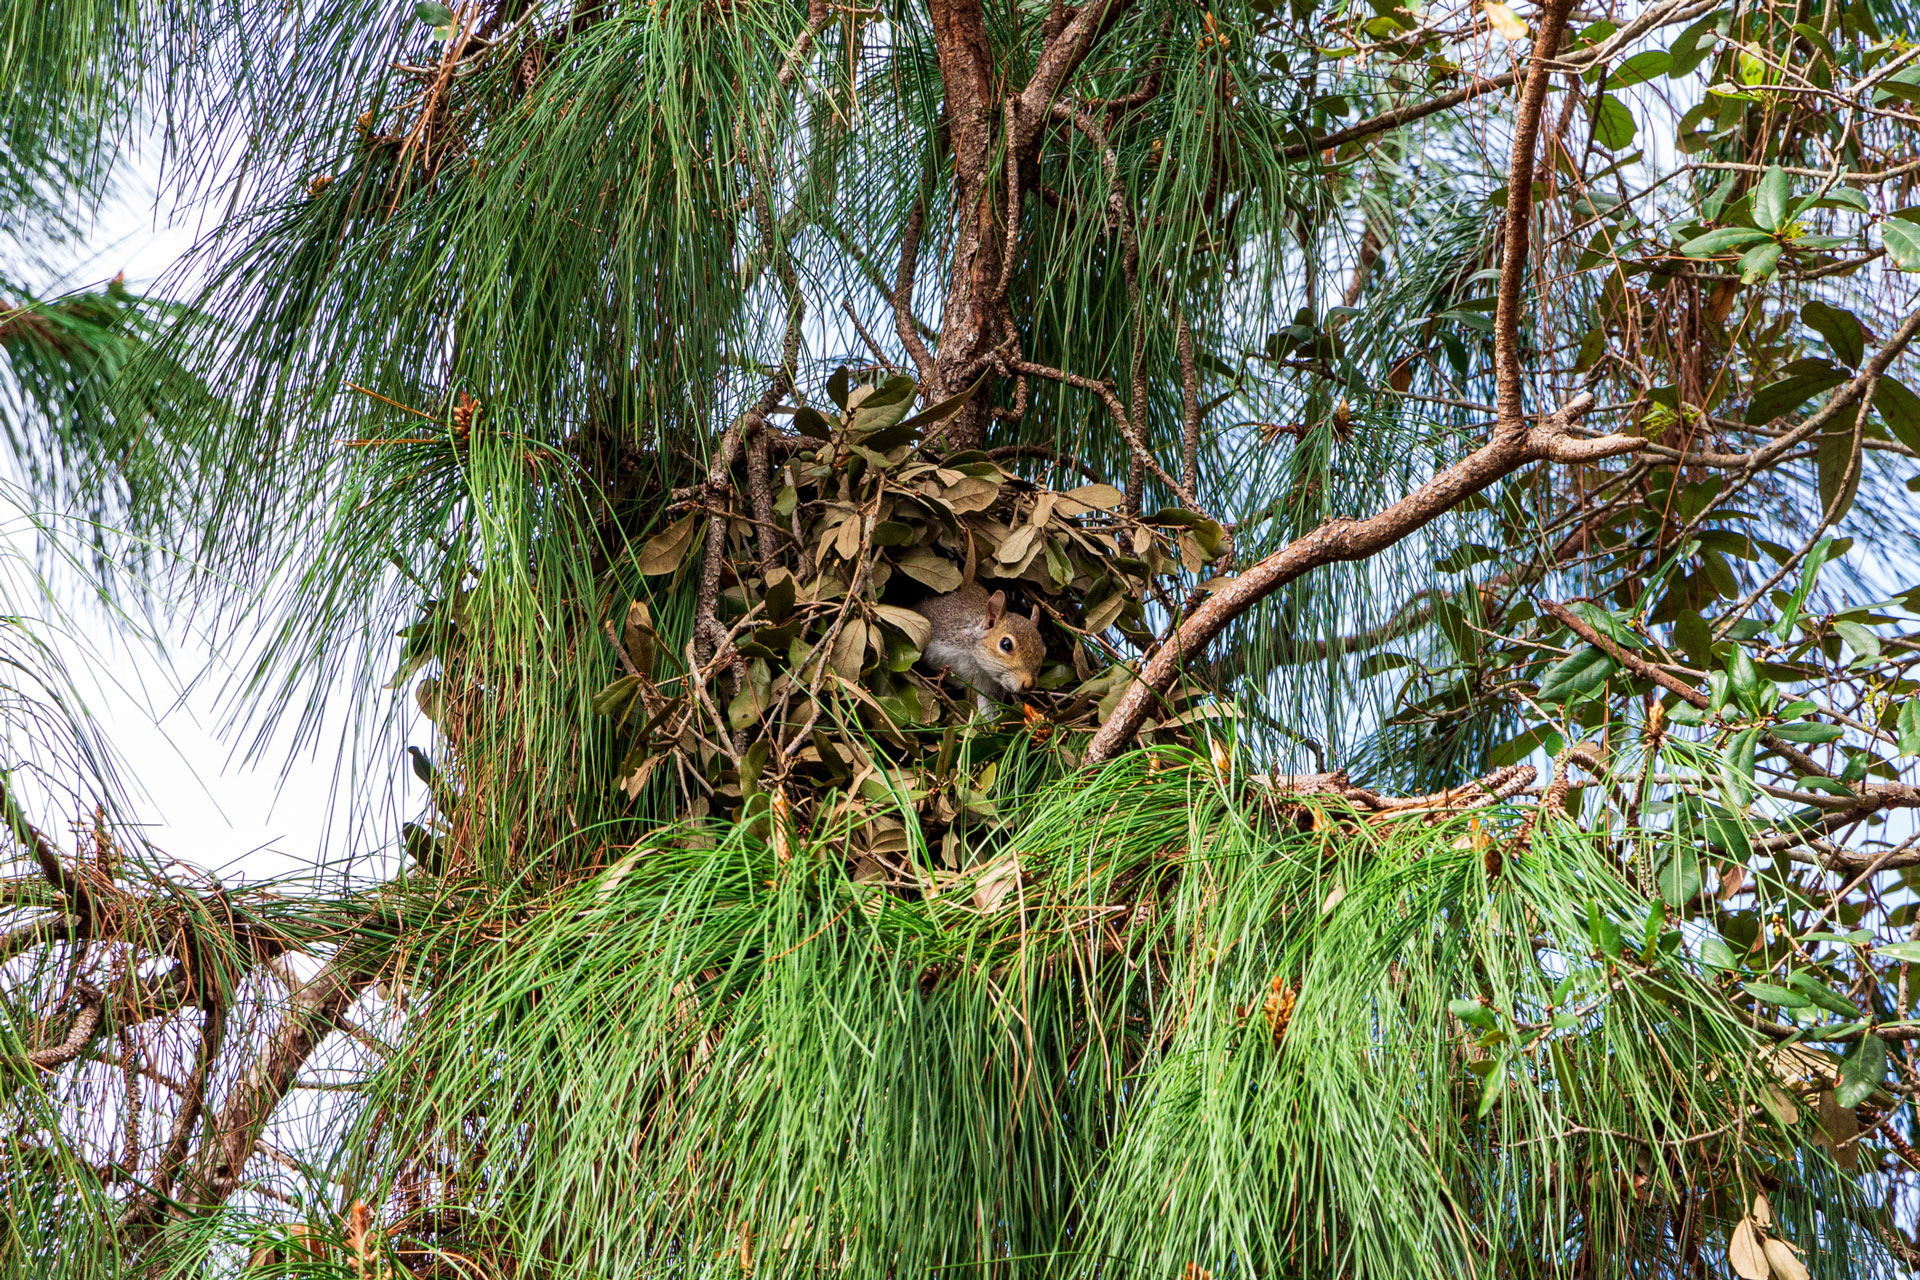 What looks like a ball of leavess its up in the branches of a coniferous tree. The small head of a squirrel pokes out.